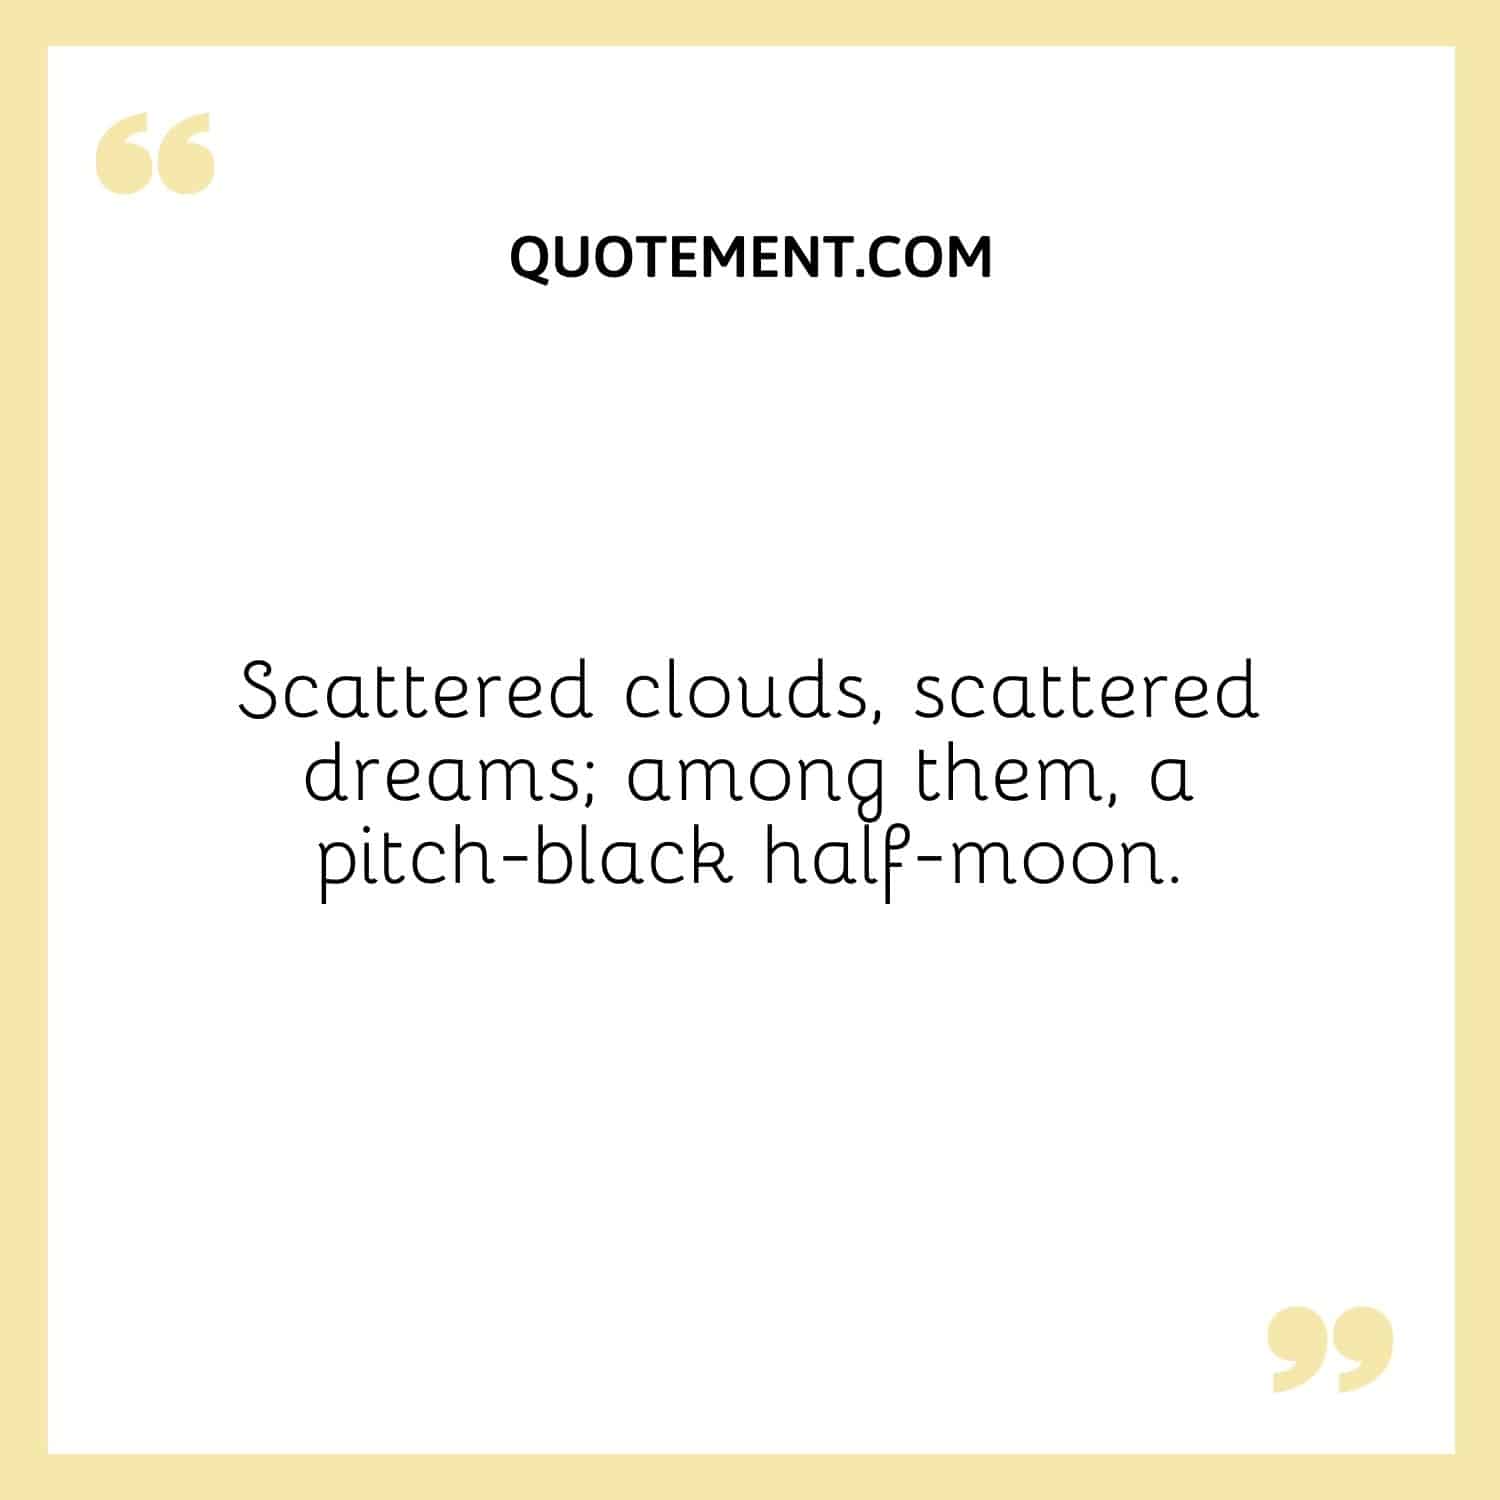 Scattered clouds, scattered dreams; among them, a pitch-black half-moon.